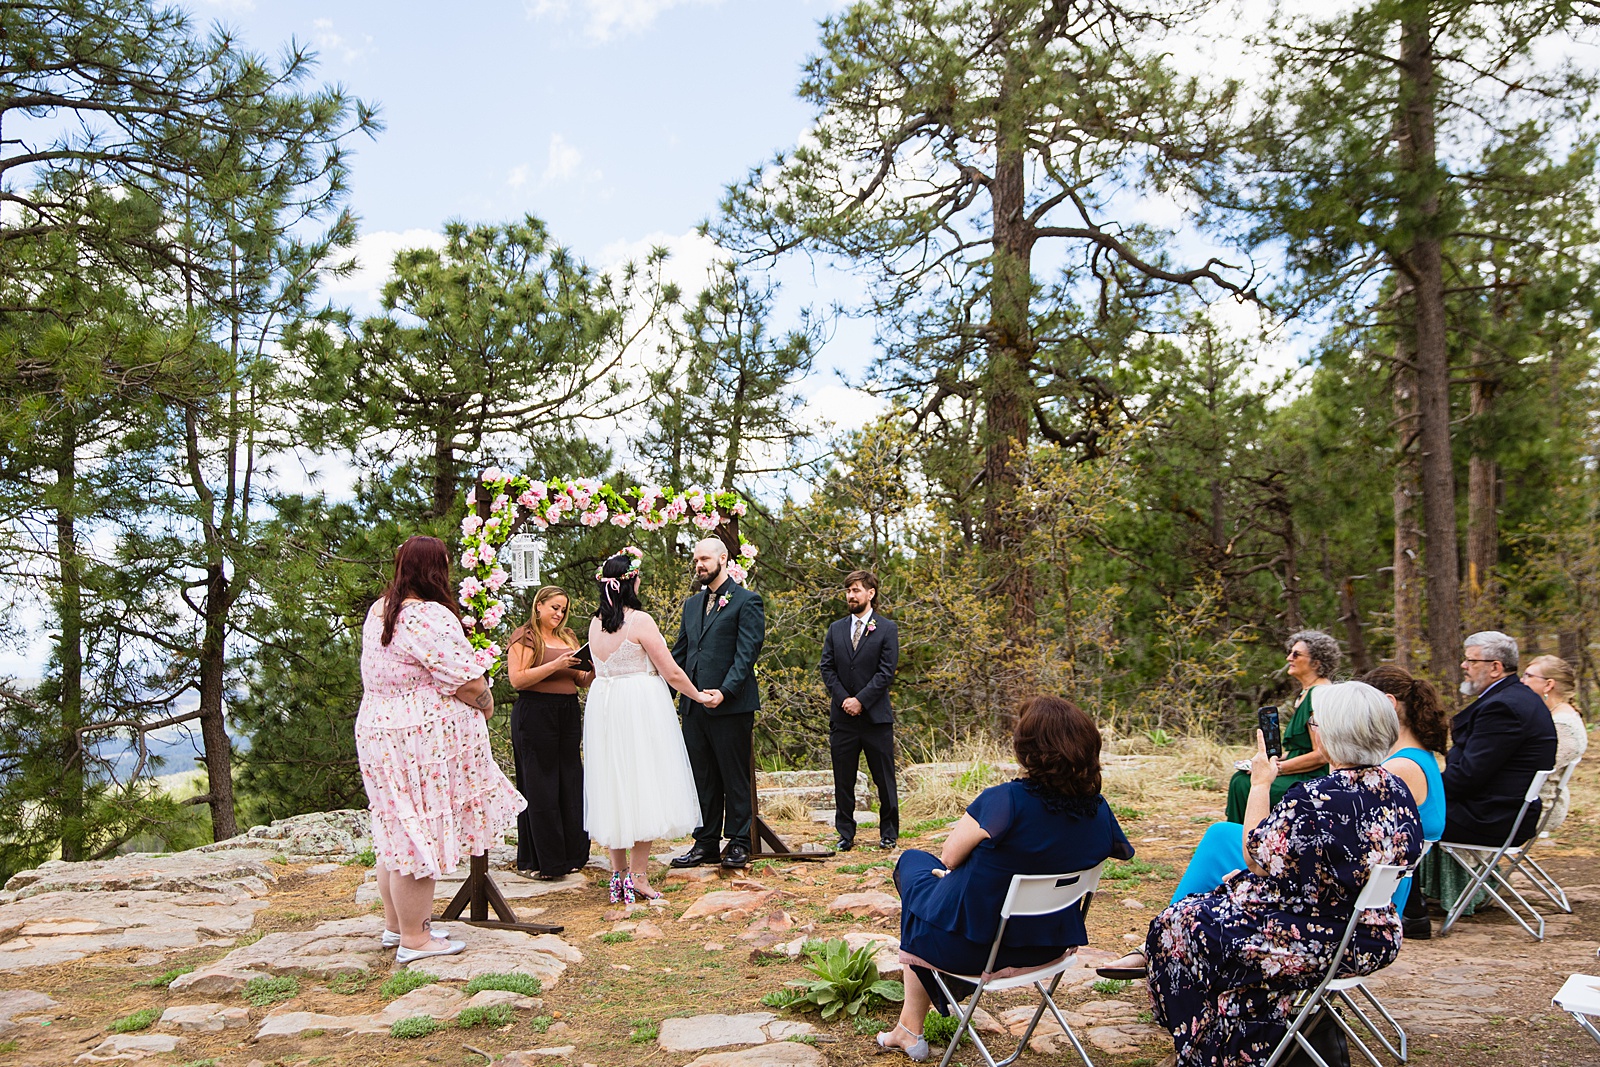 Bride & Groom togethering during Mogollon Rim wedding ceremony by Payson elopement photographer PMA Photography.